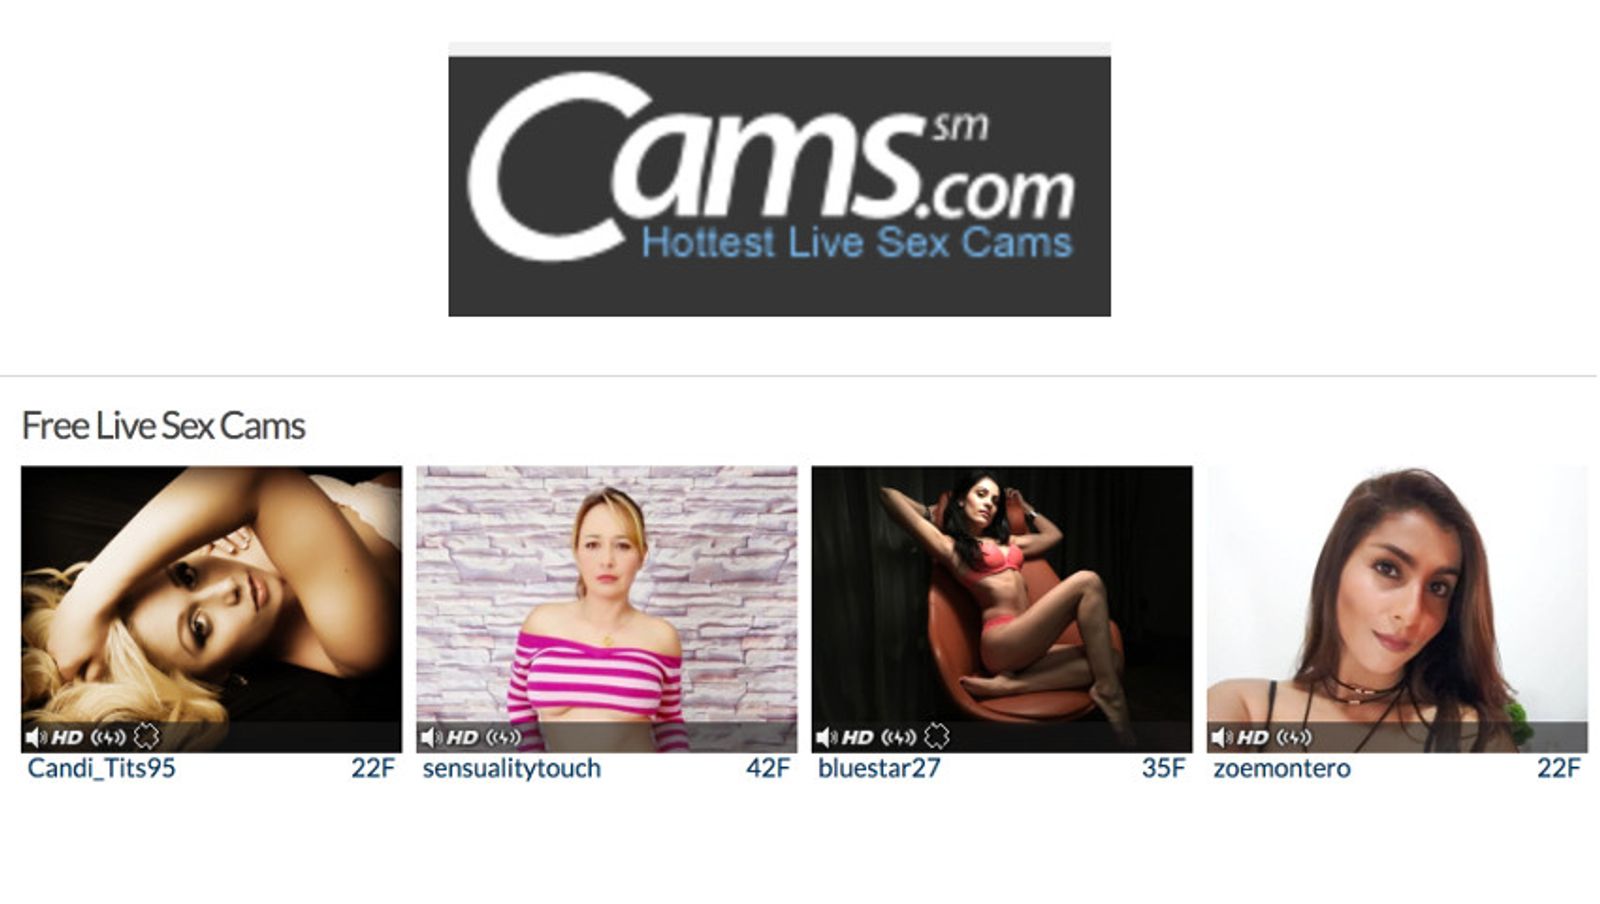 Cams.com Offers Valentine's Day Promotions for Members